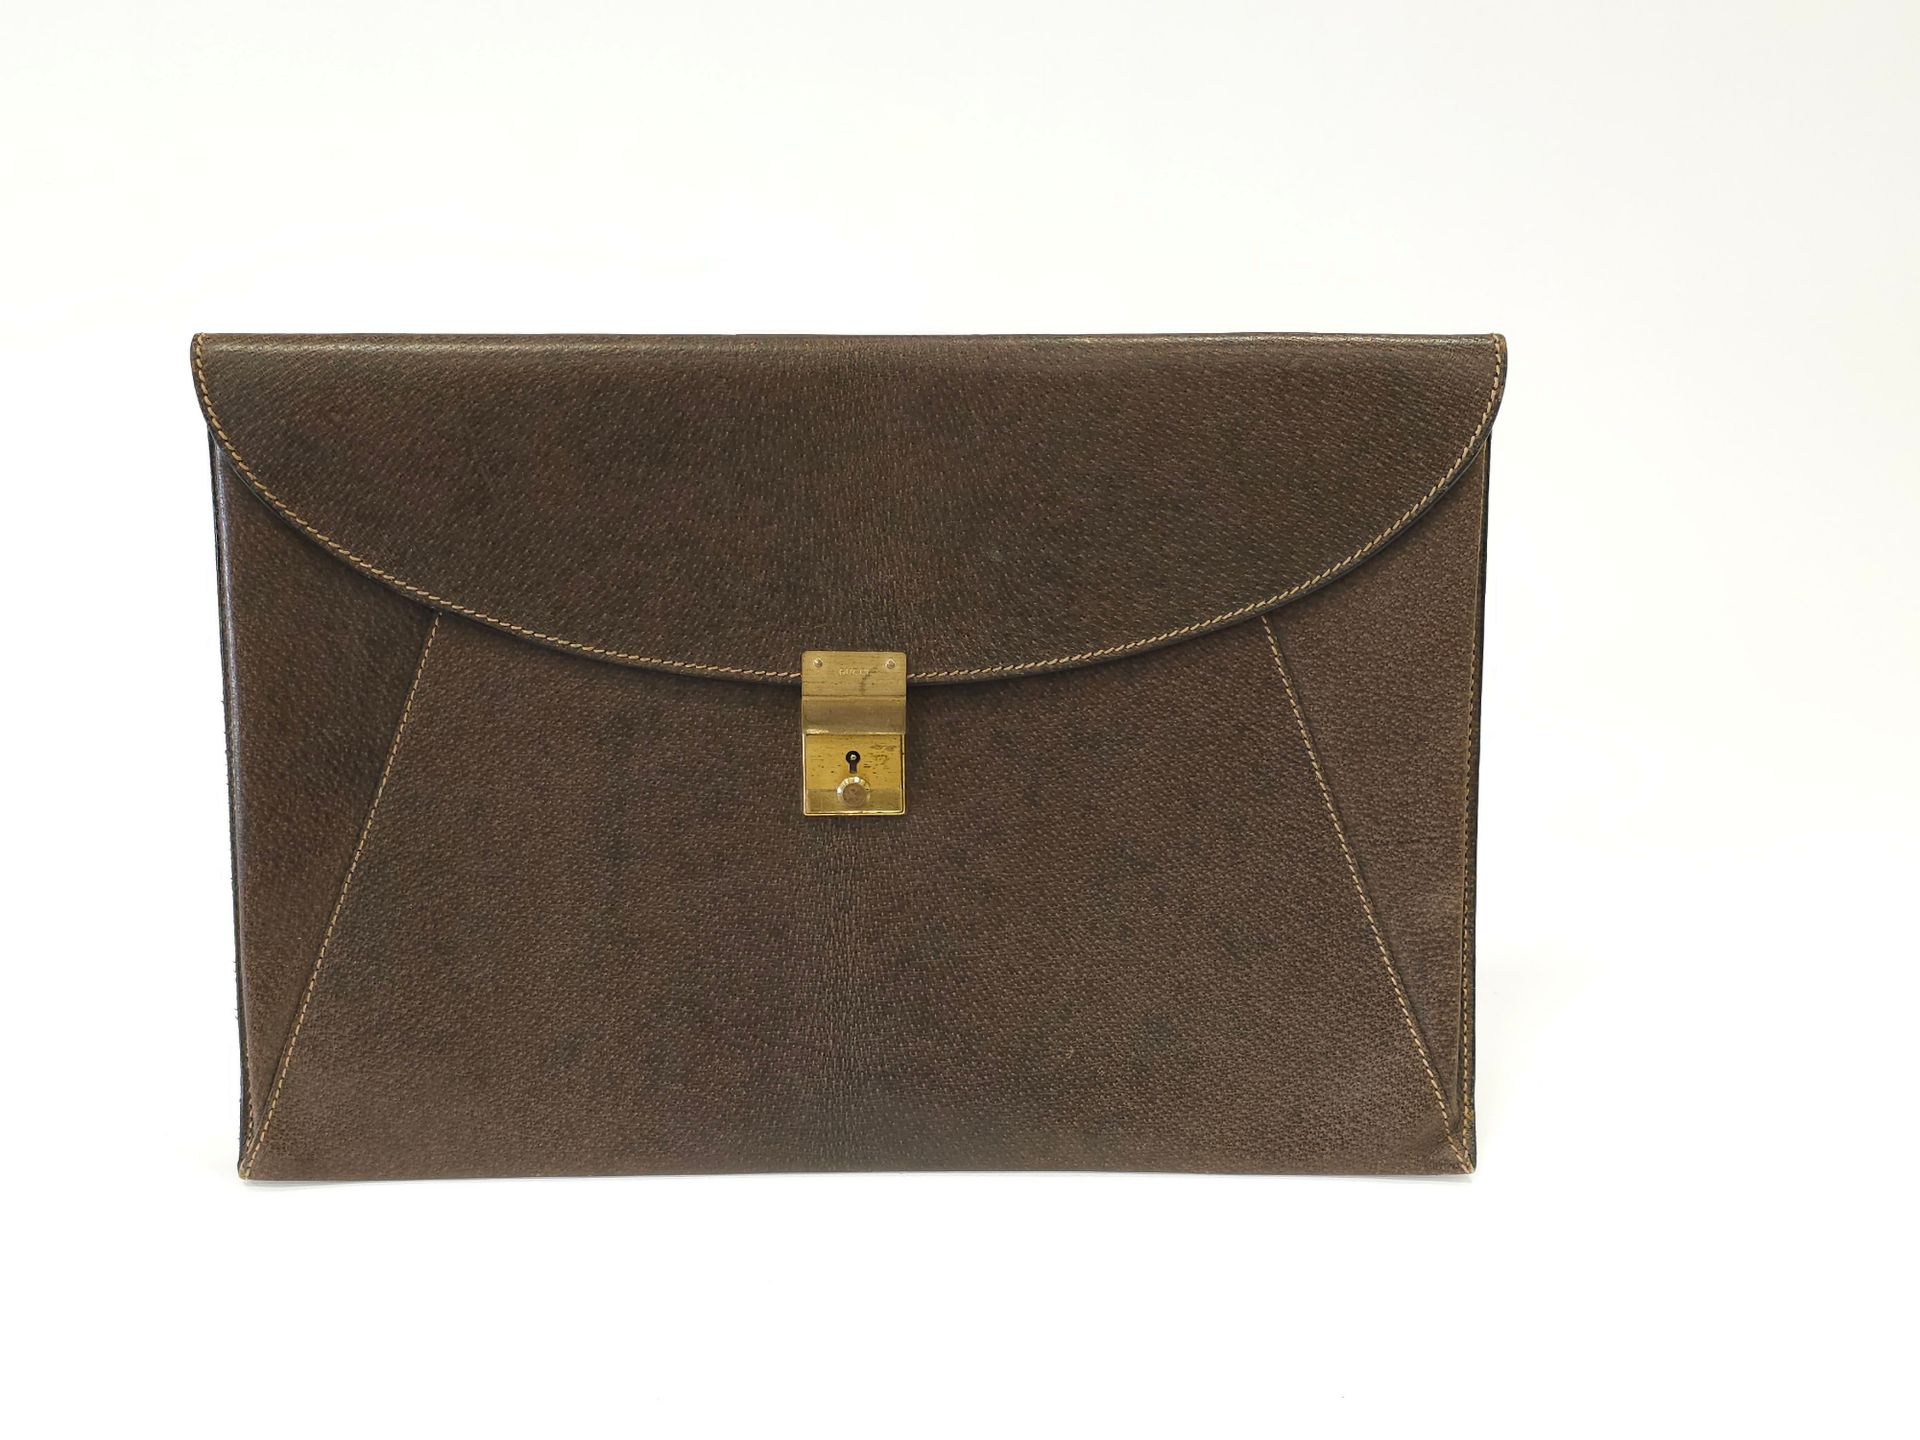 Null GUCCI
brown leather briefcase, gold closure
Worn